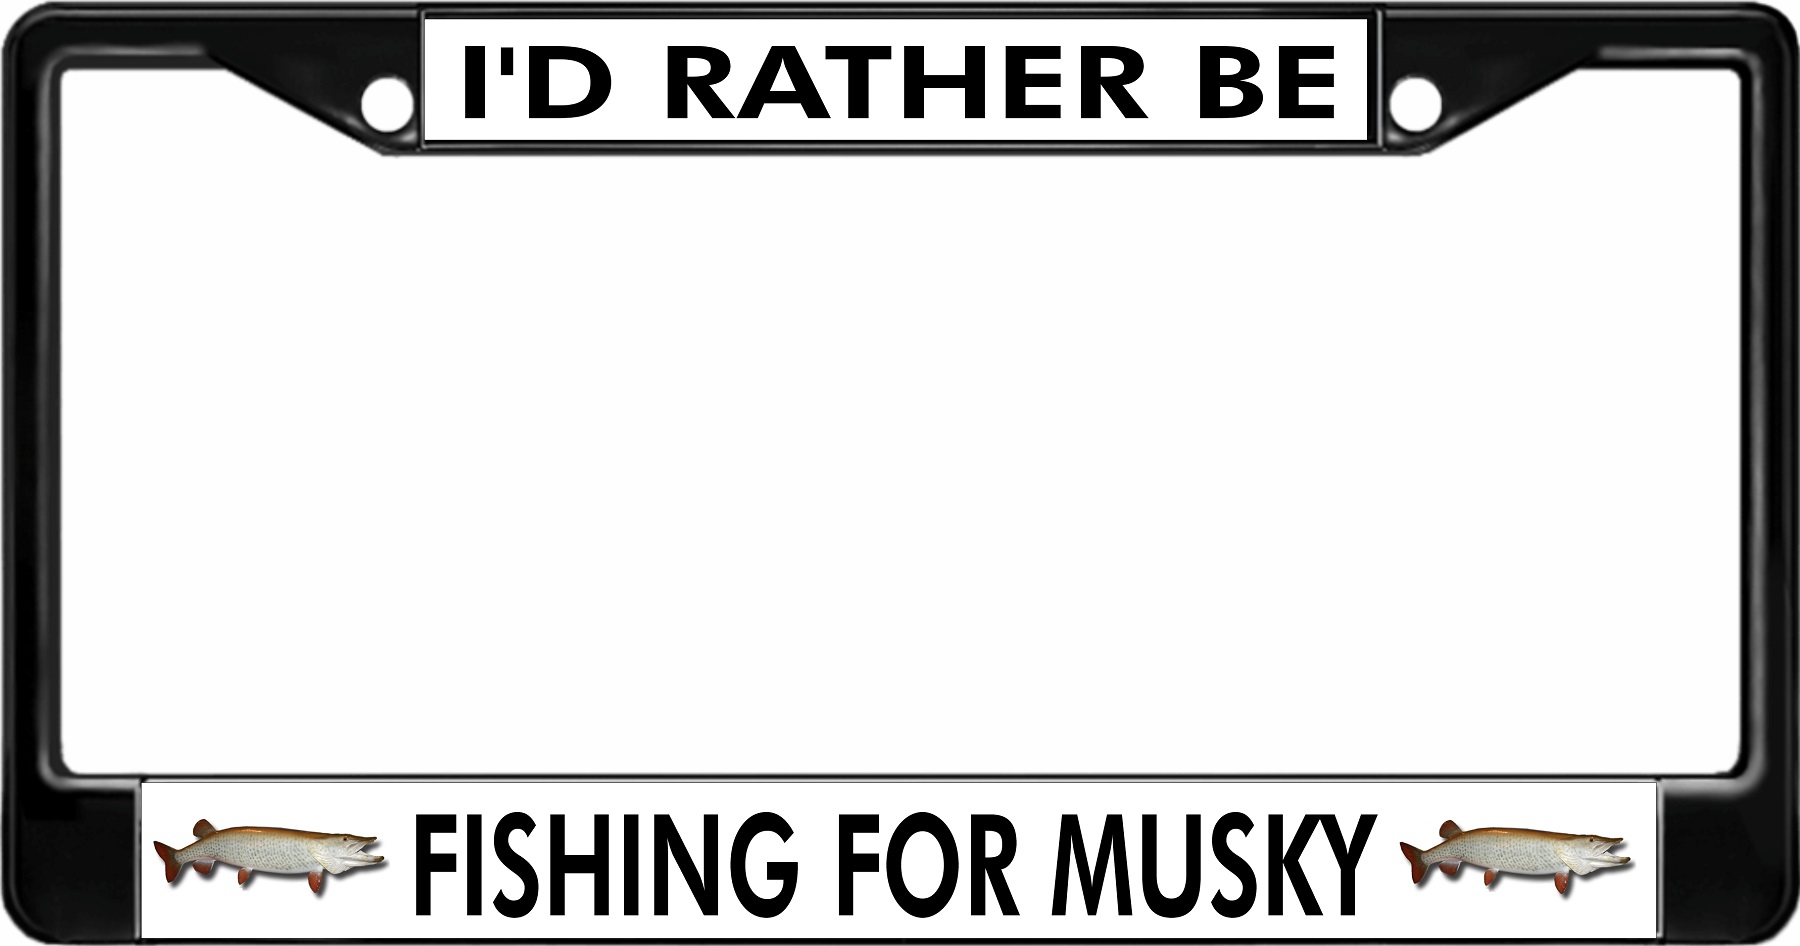 I'd Rather Be FISHING For Musky Black License Plate Frame